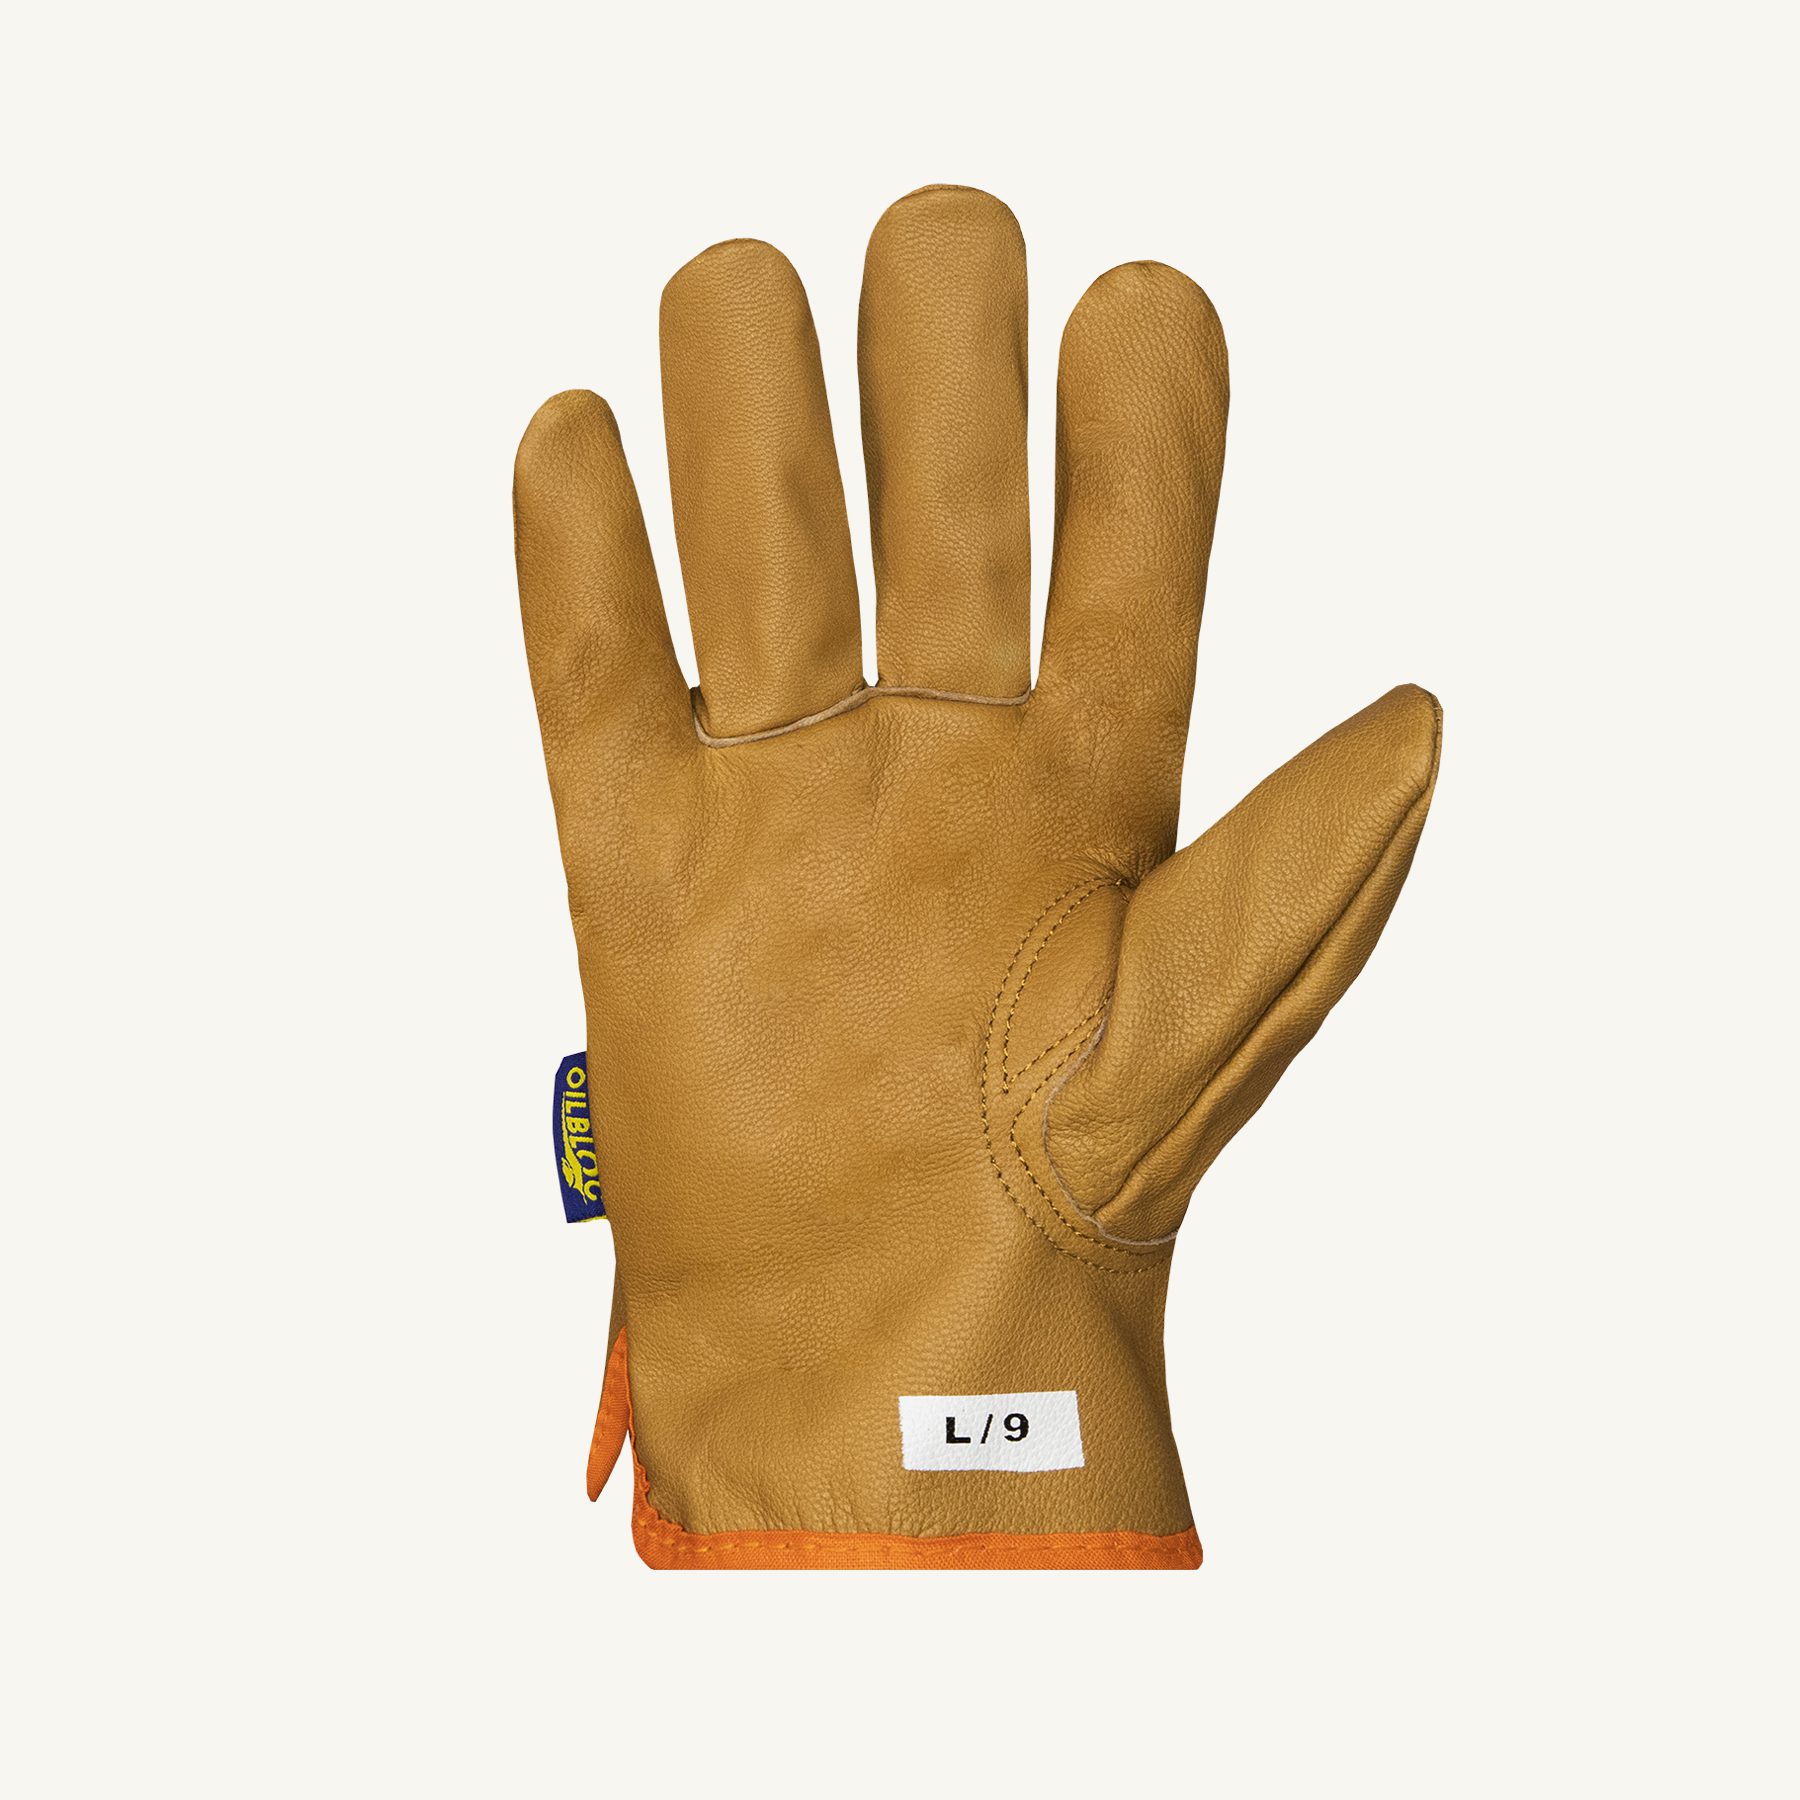  Glove Proof high performance waterproofing treatment restores  DWR water repellency for leather, fabric, synthetic, gloves and mittens,  revives breathability and protects grip : Tools & Home Improvement